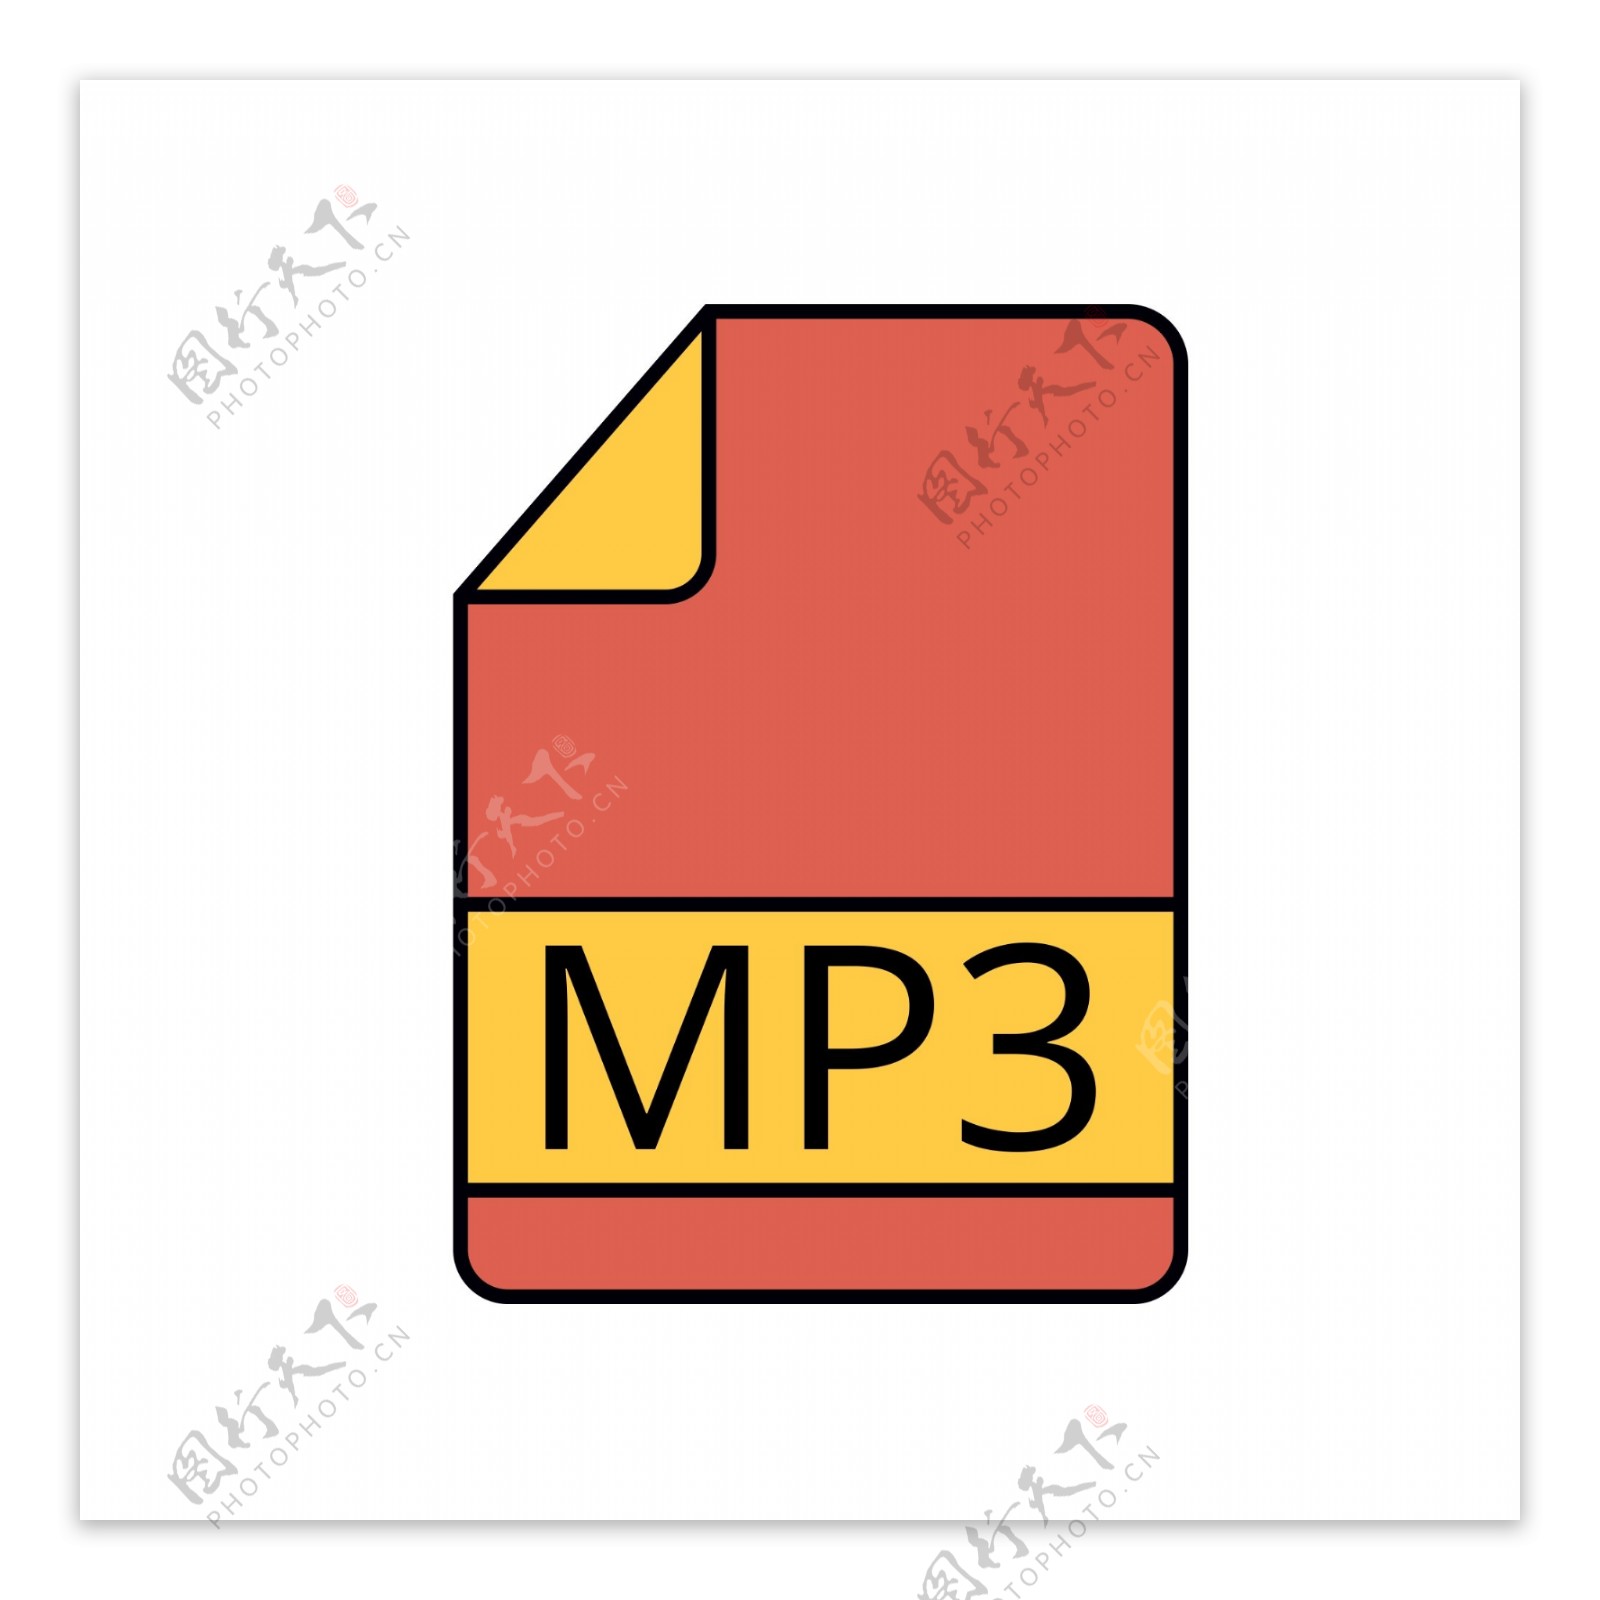 MP3文件